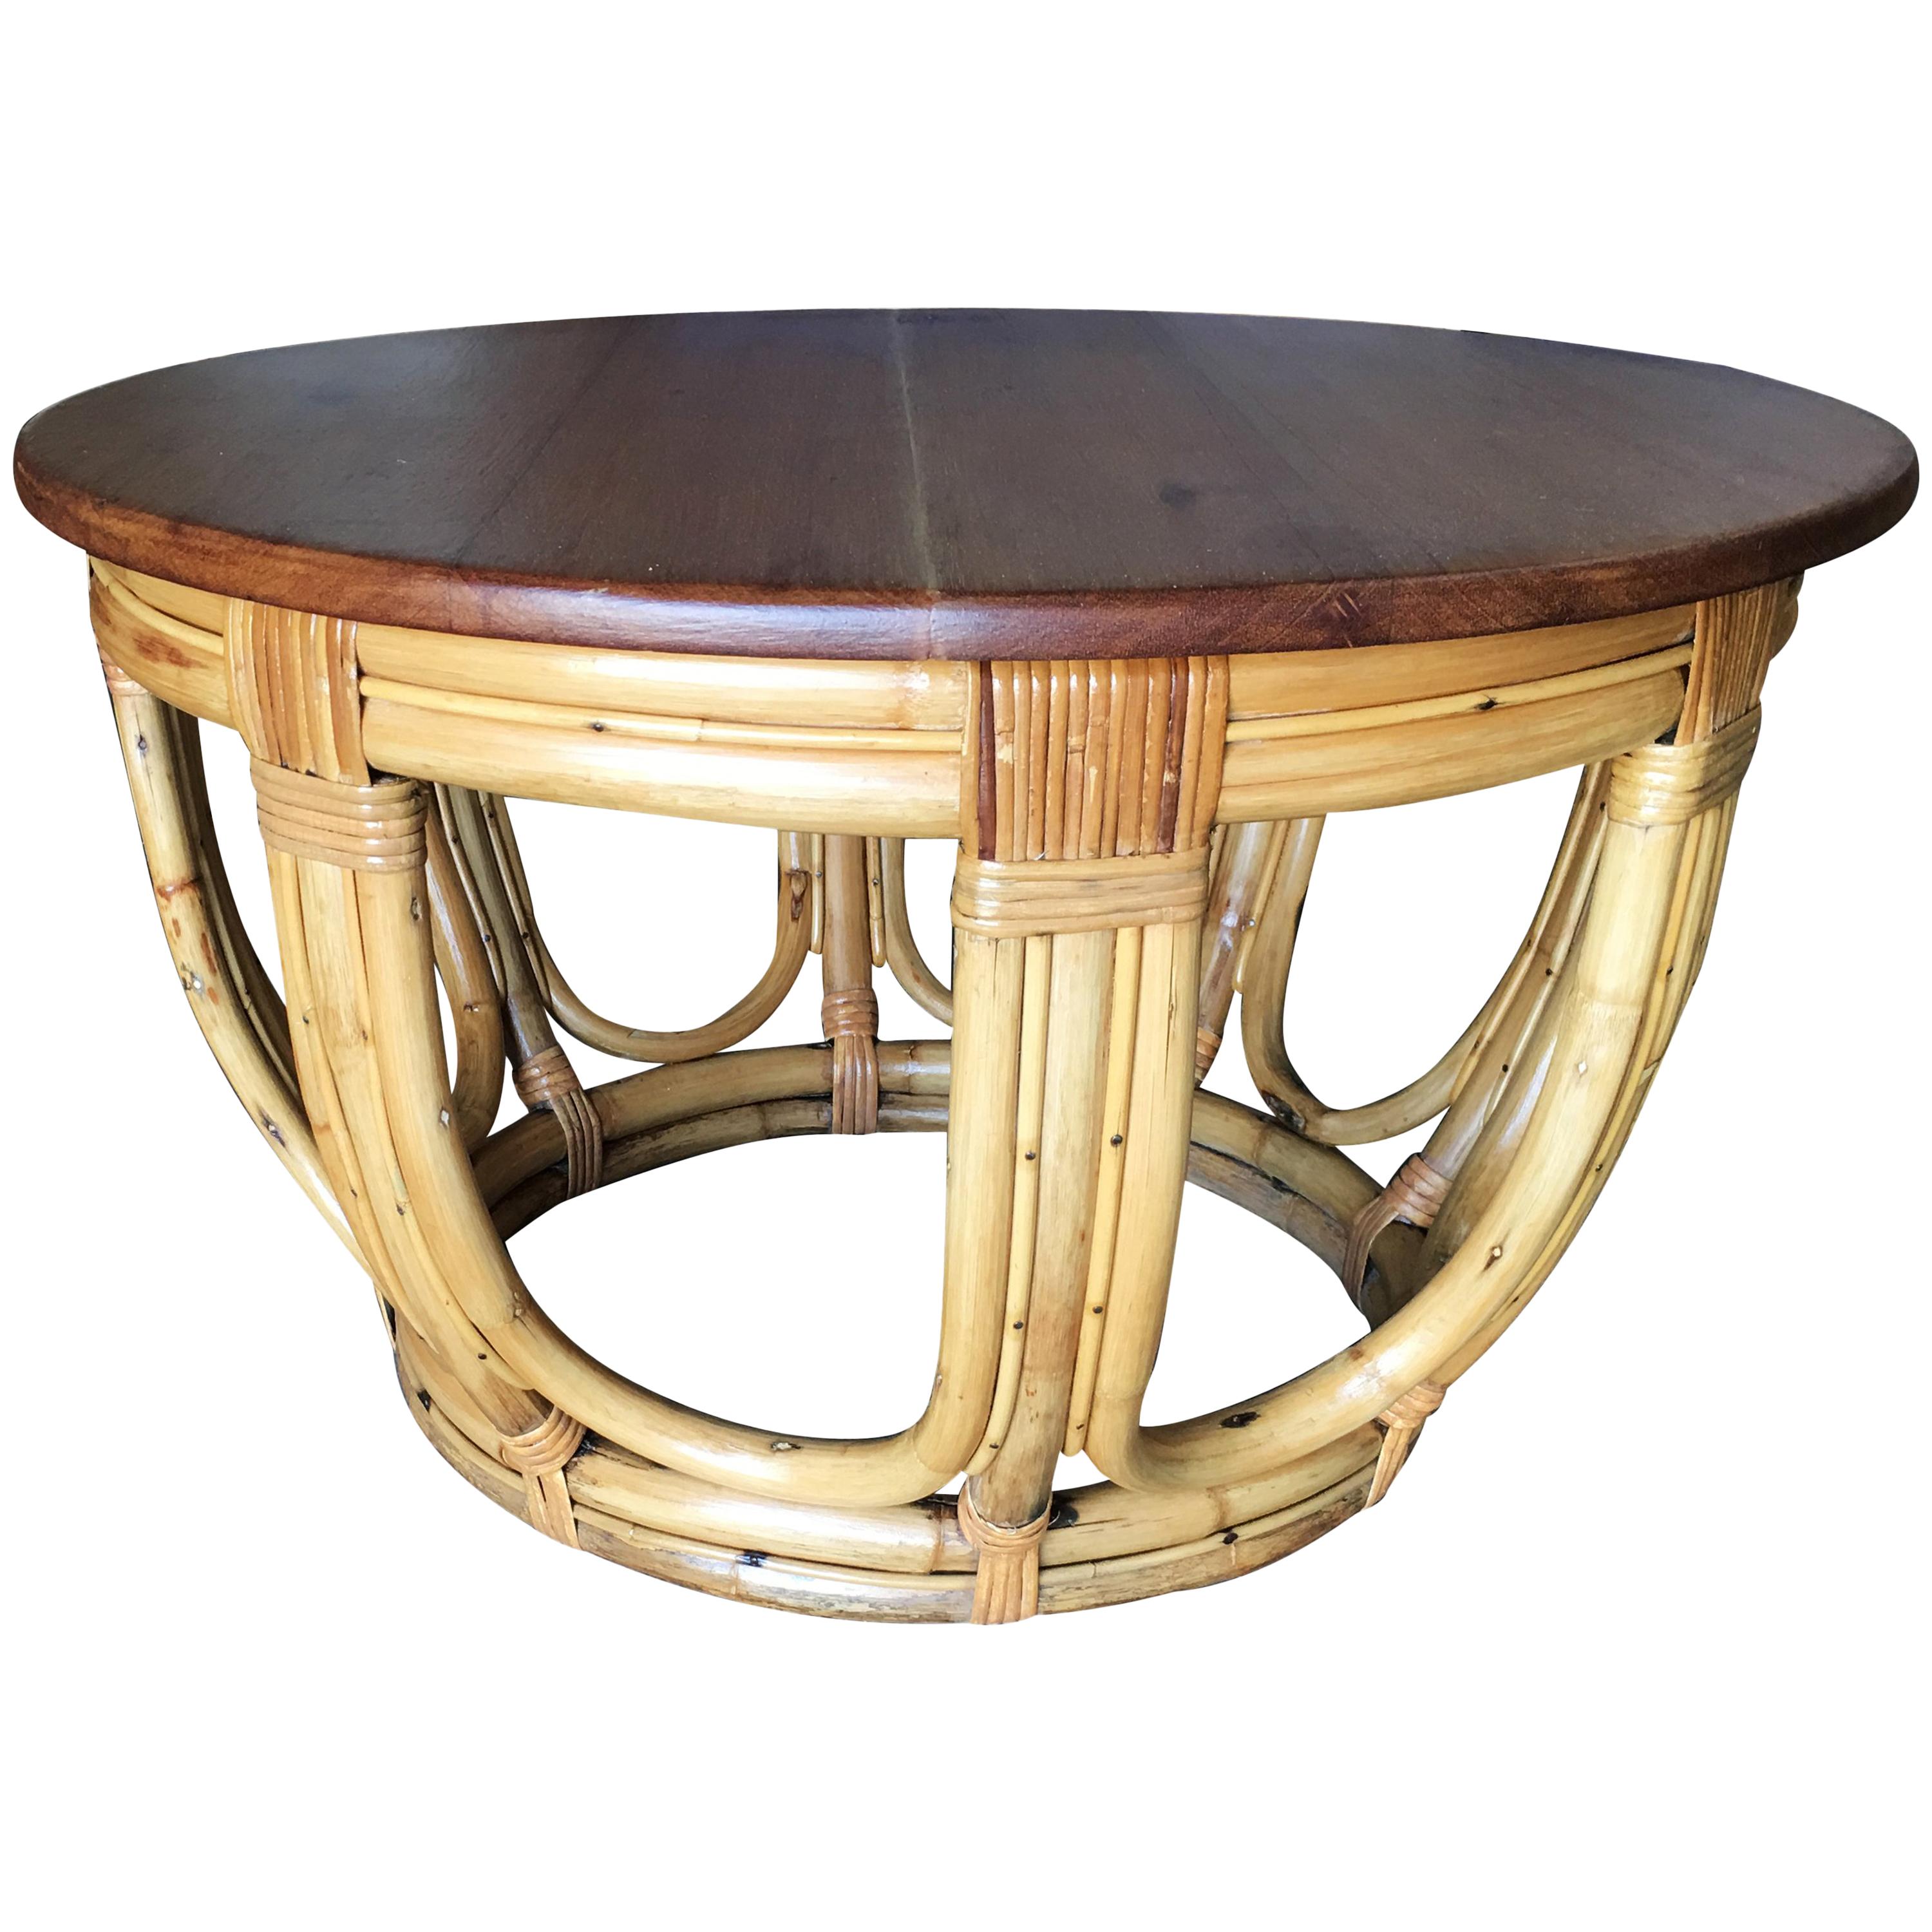 Restored Round 1930's Rattan Coffee Table with Mahogany Top and Fancy Wrappings